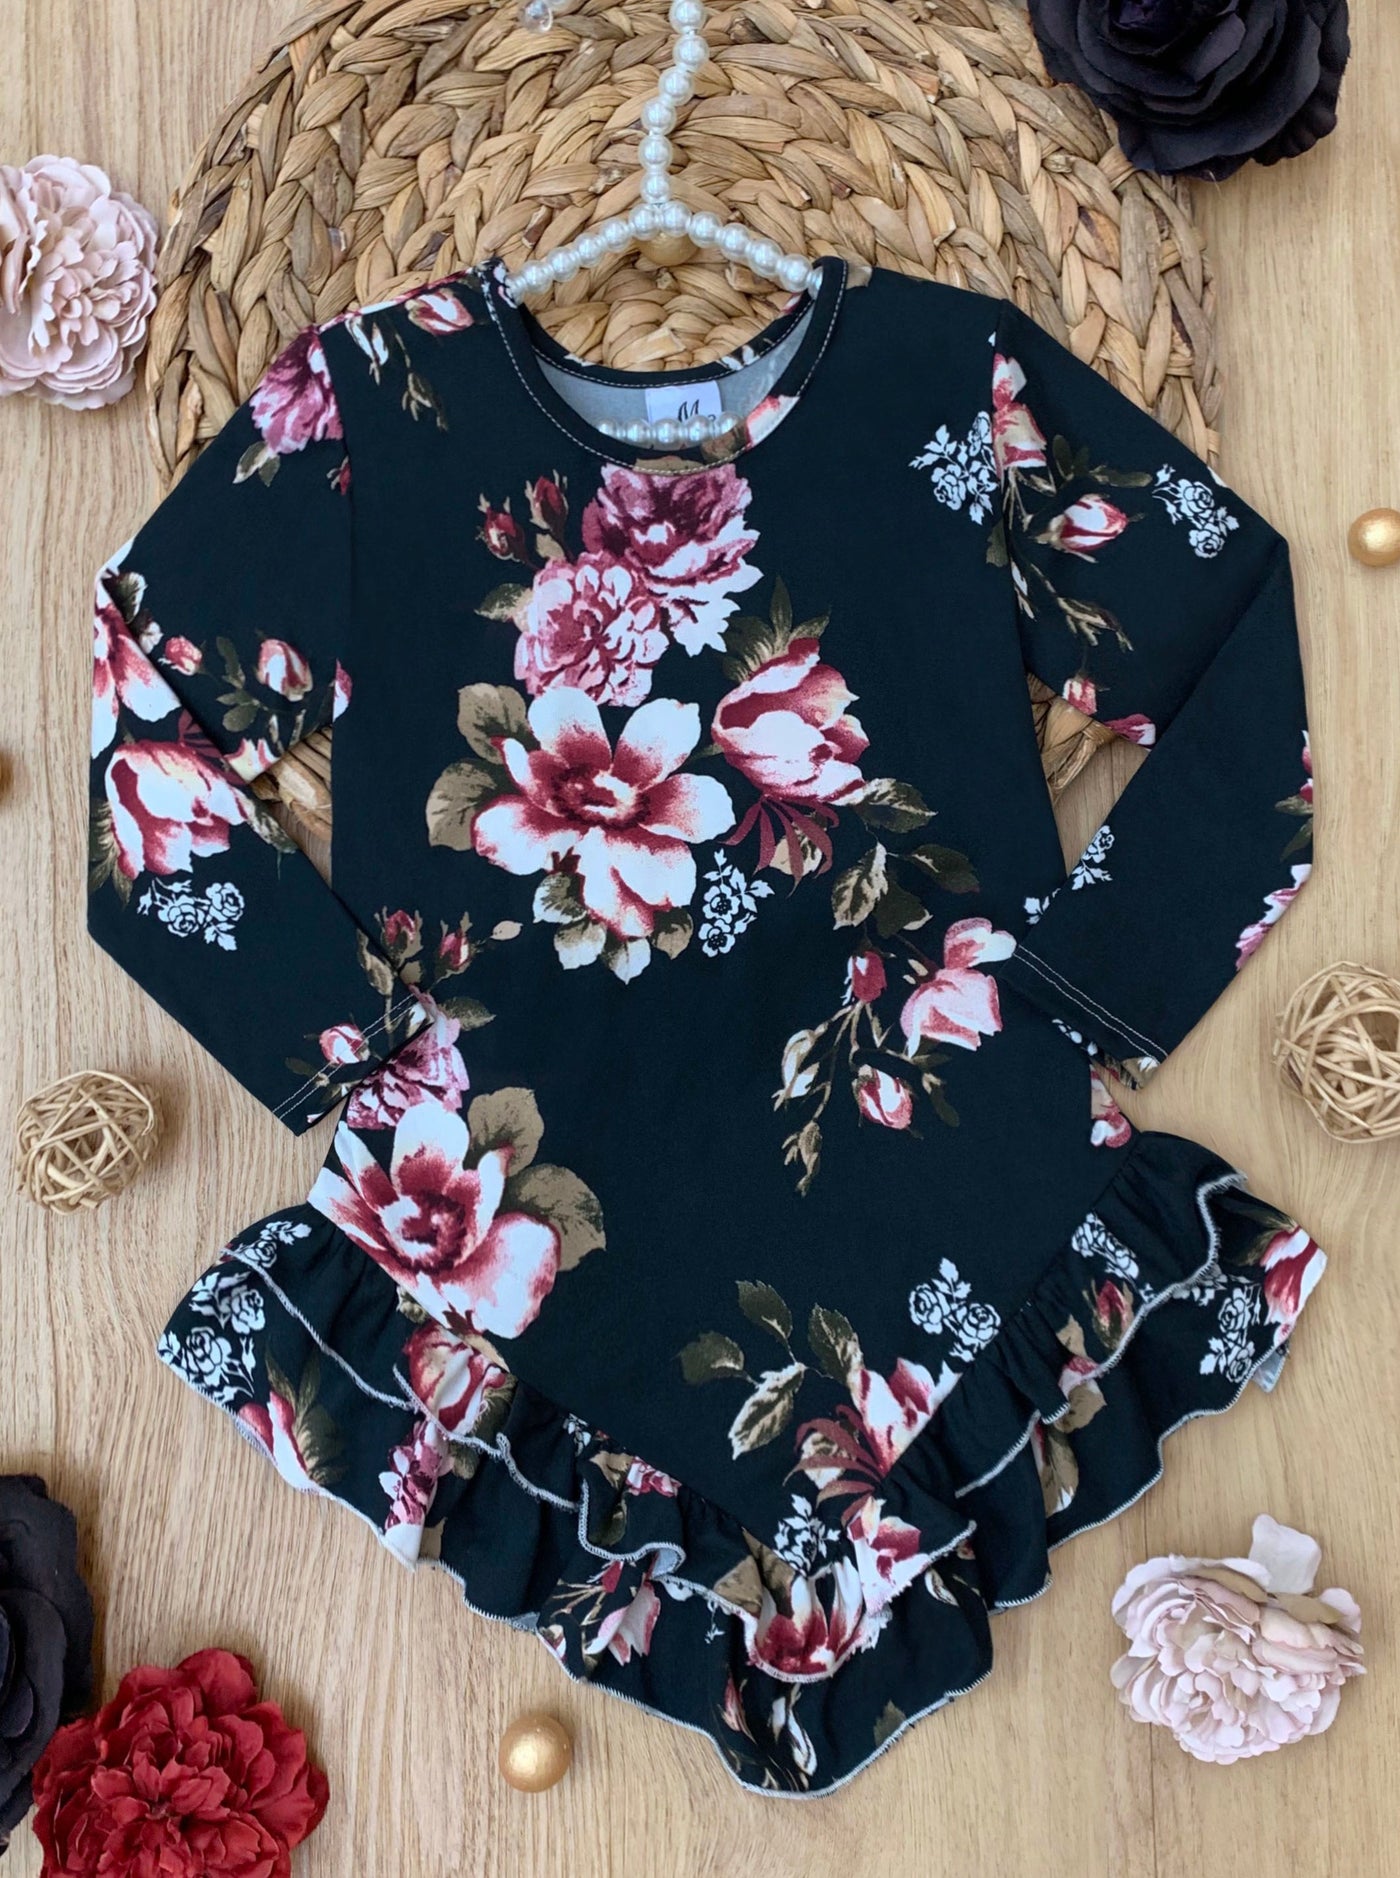 Mia Belle Girls Floral Top | Girls Fall Outfits